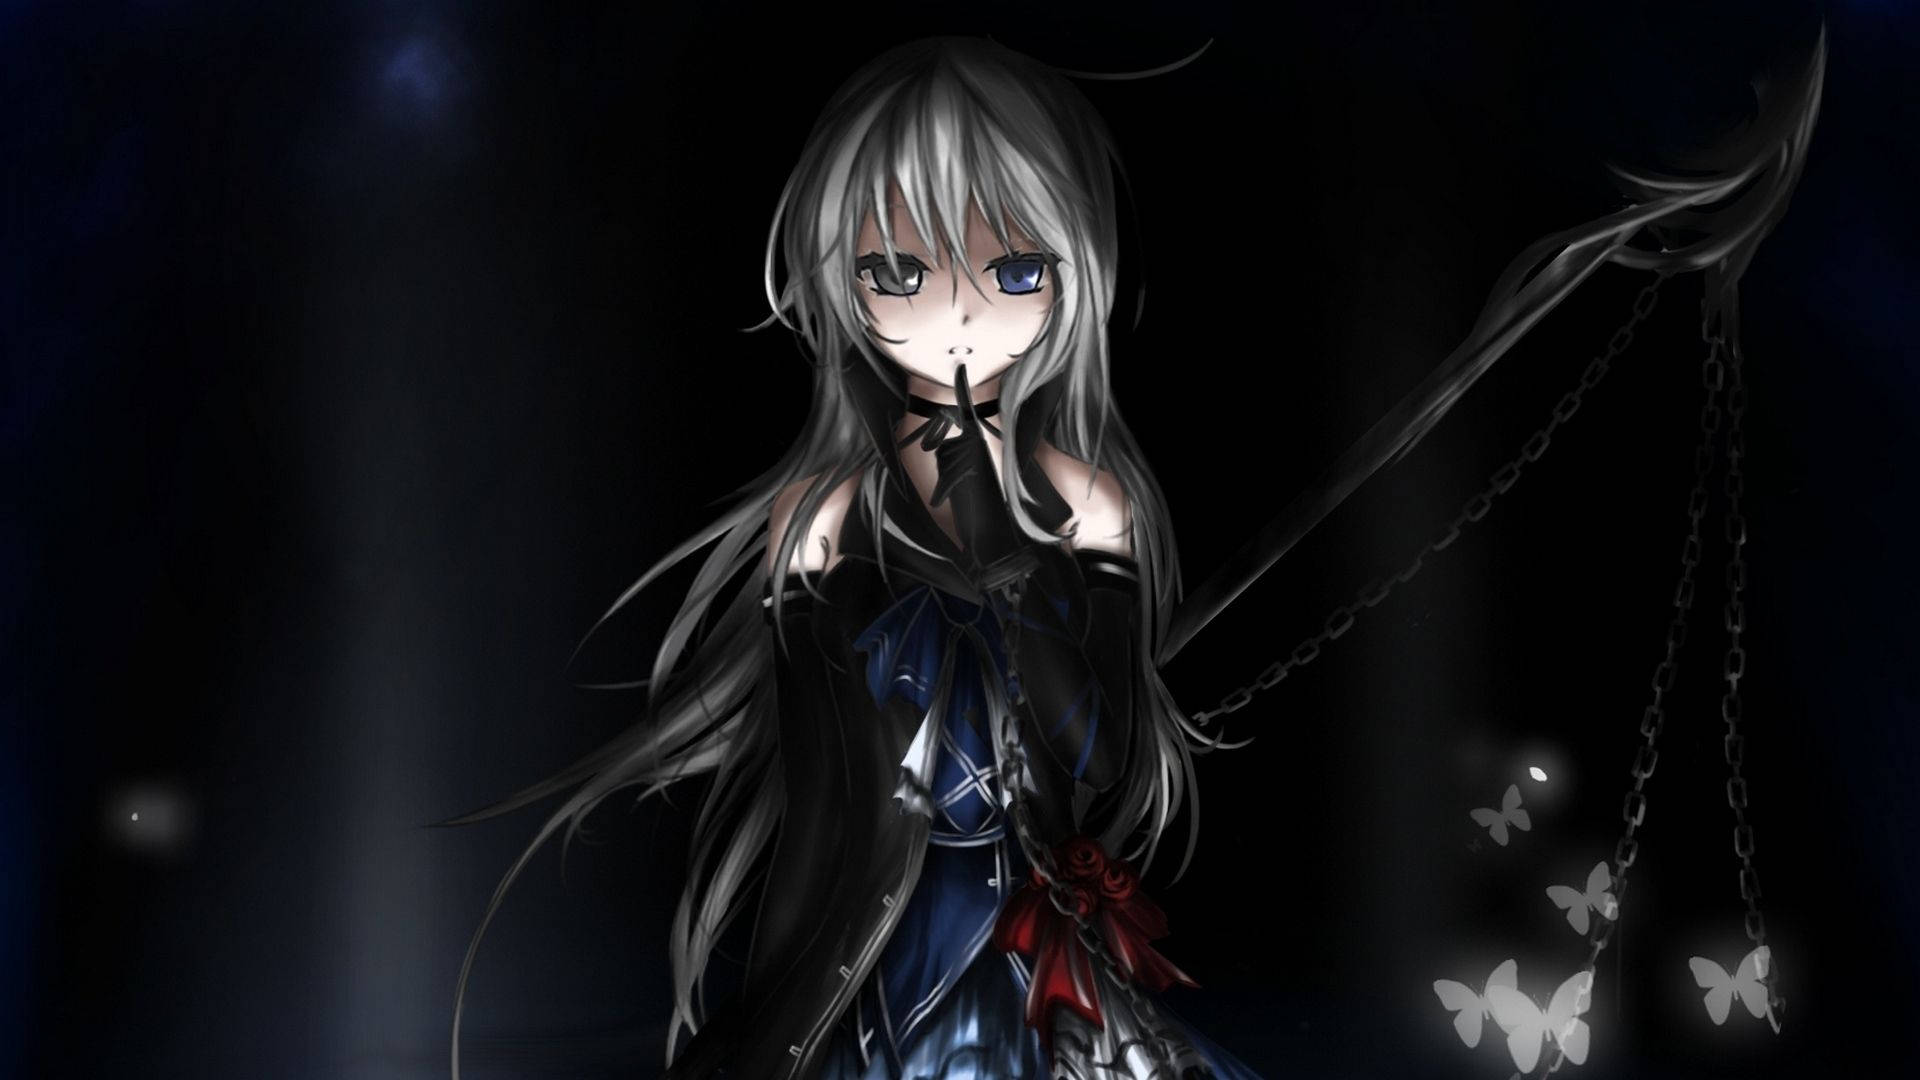 Anime girl in black gothic lolita dress with white butterflies wallpaper